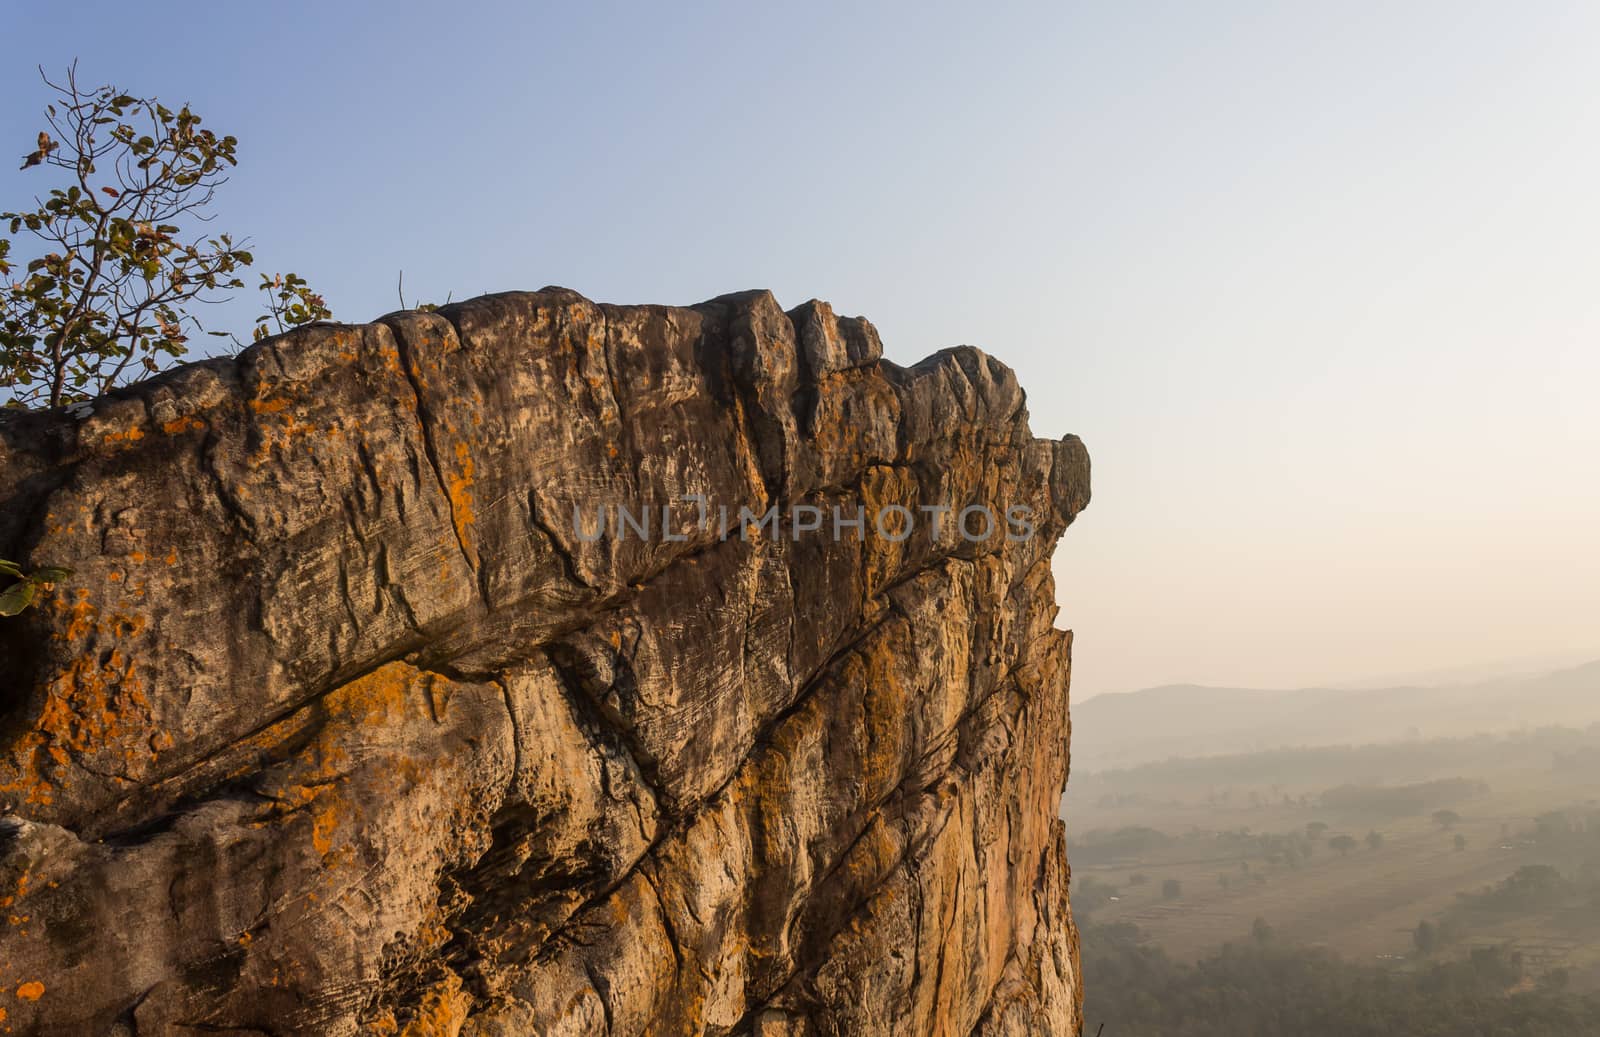 Pha Hua Rue Rock Cliff Mountain Hill Phayao Attractions Thailand by steafpong